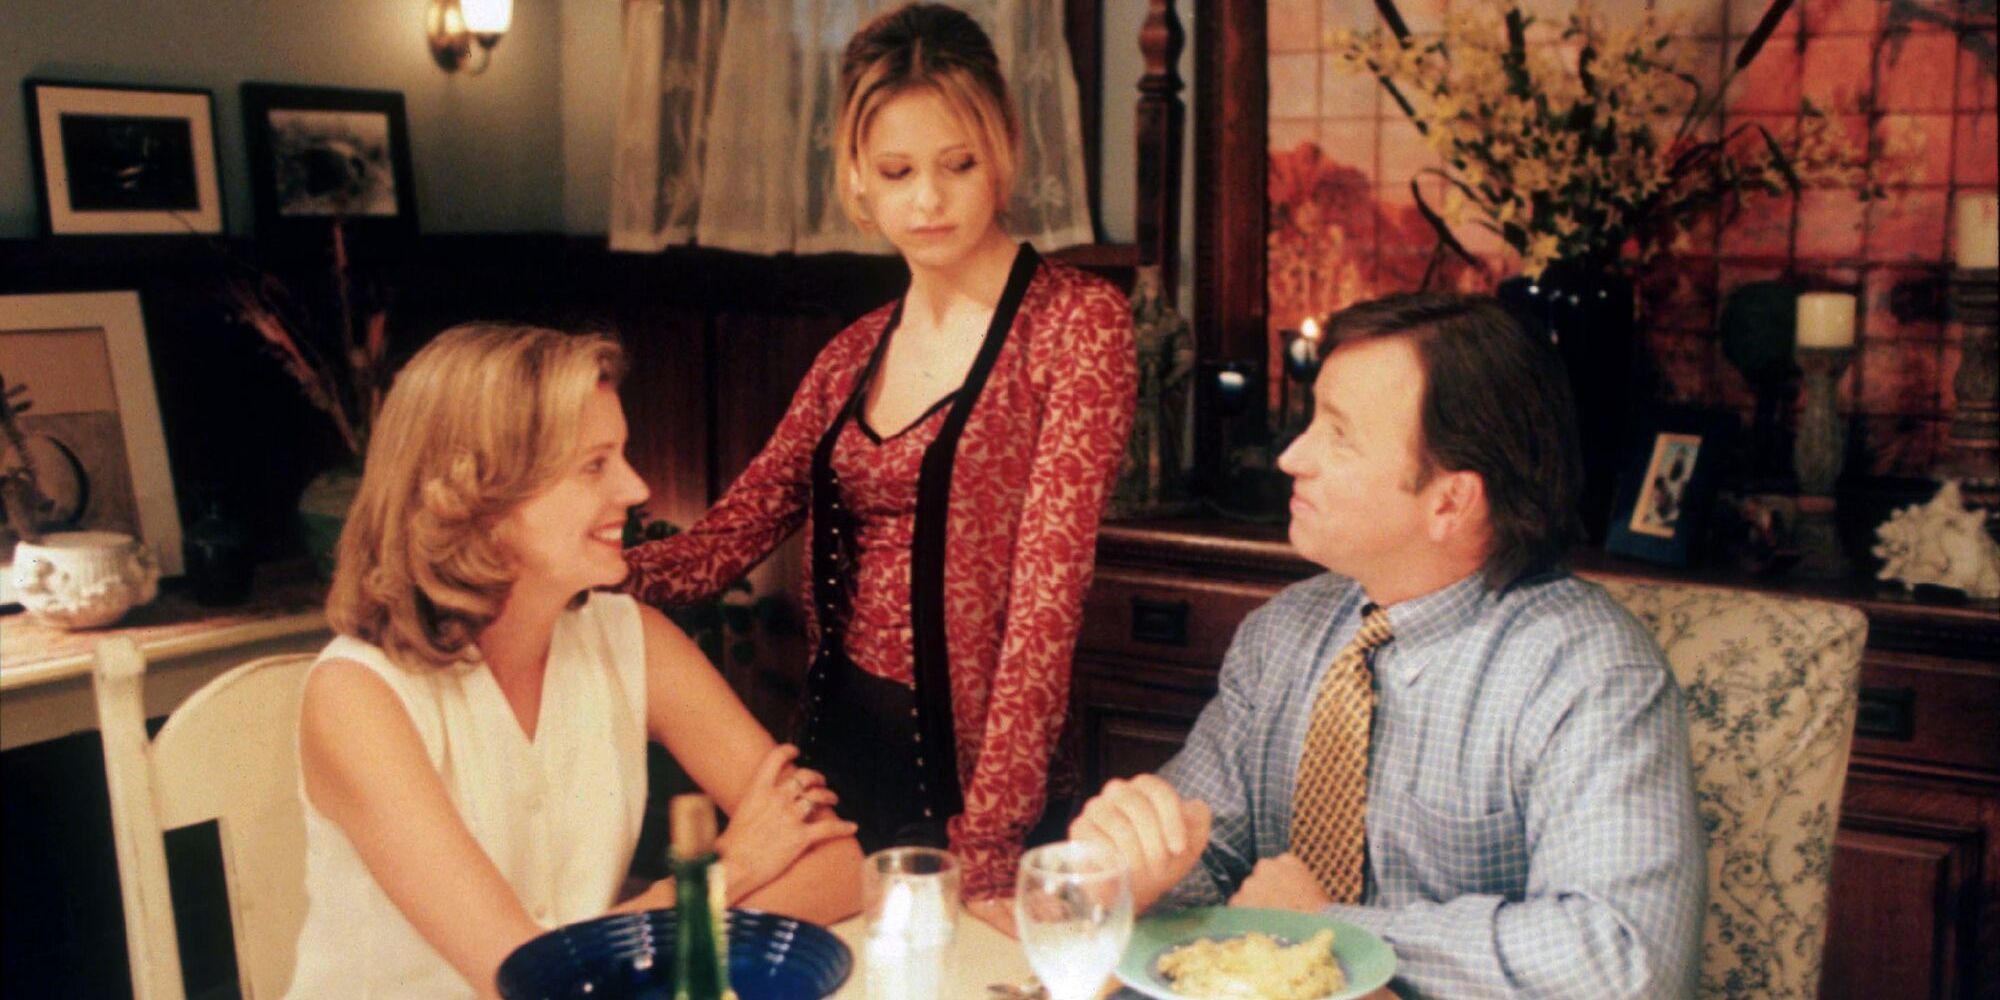 Kristine Sutherland as Joyce, Sarah Michelle Gellar as Buffy and John Ritter as Ted in Buffy the Vampire Slayer